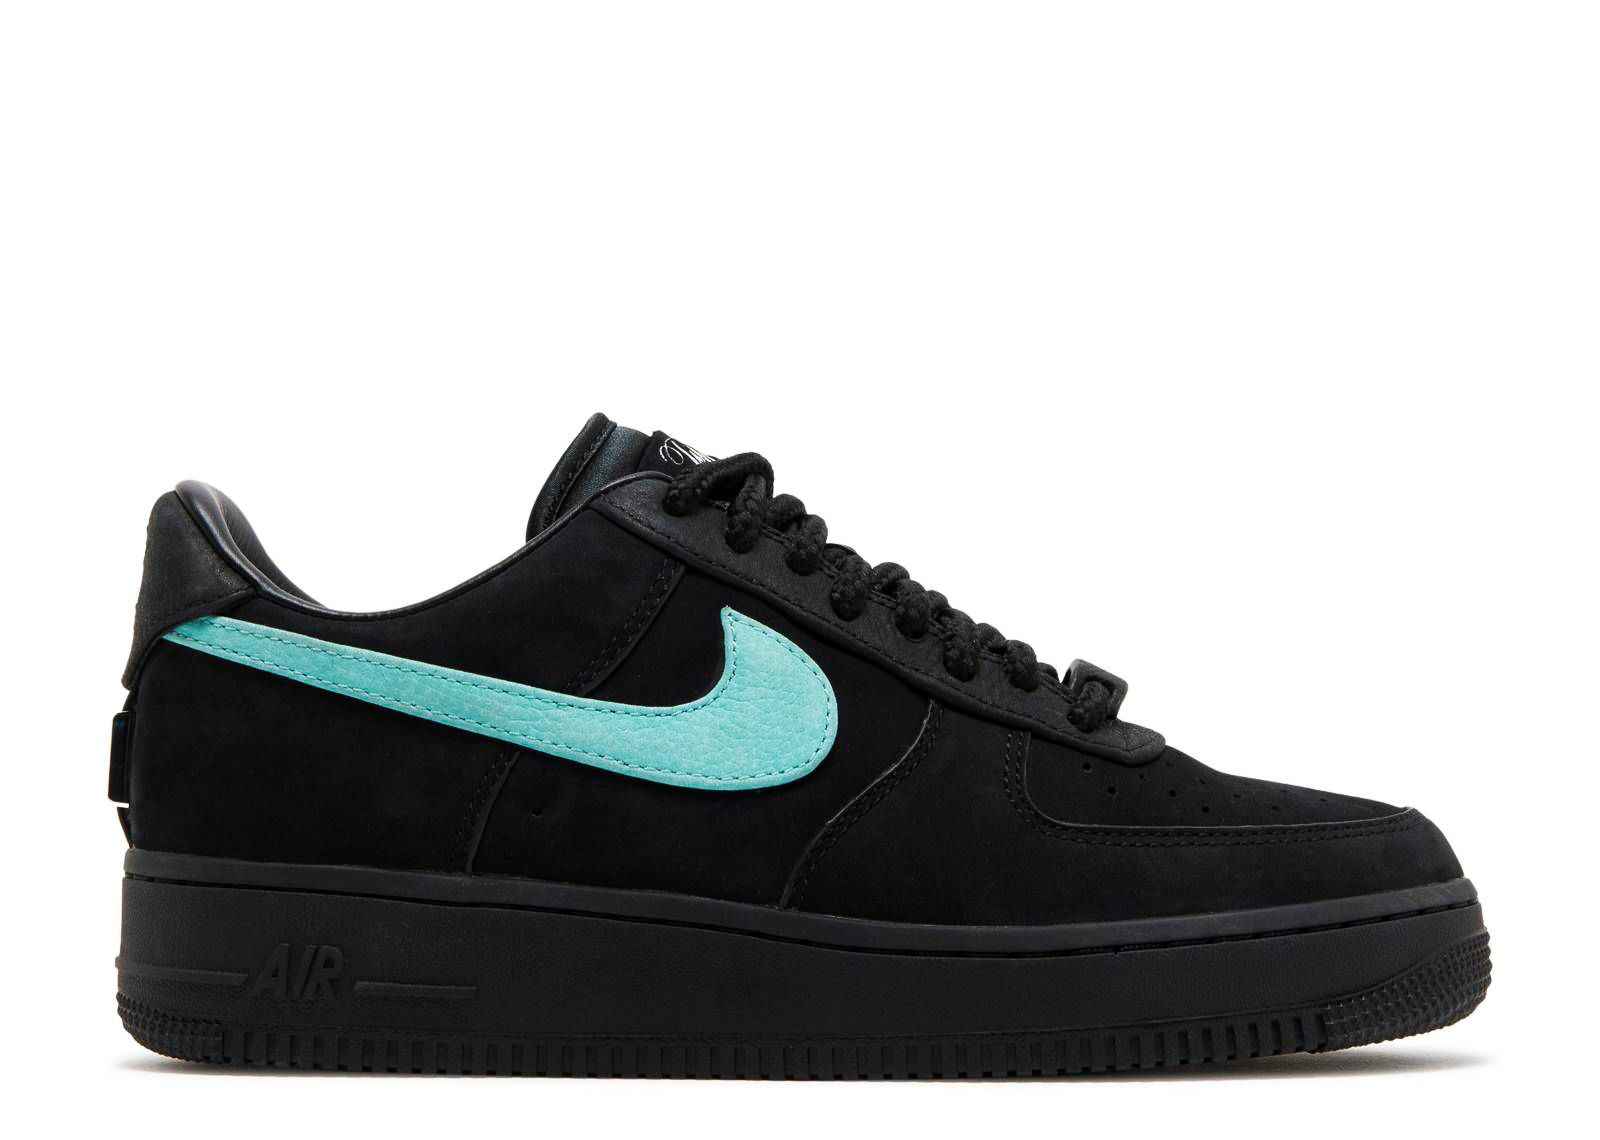 Tiffany & Co Nike Air Force 1 Low 1837-